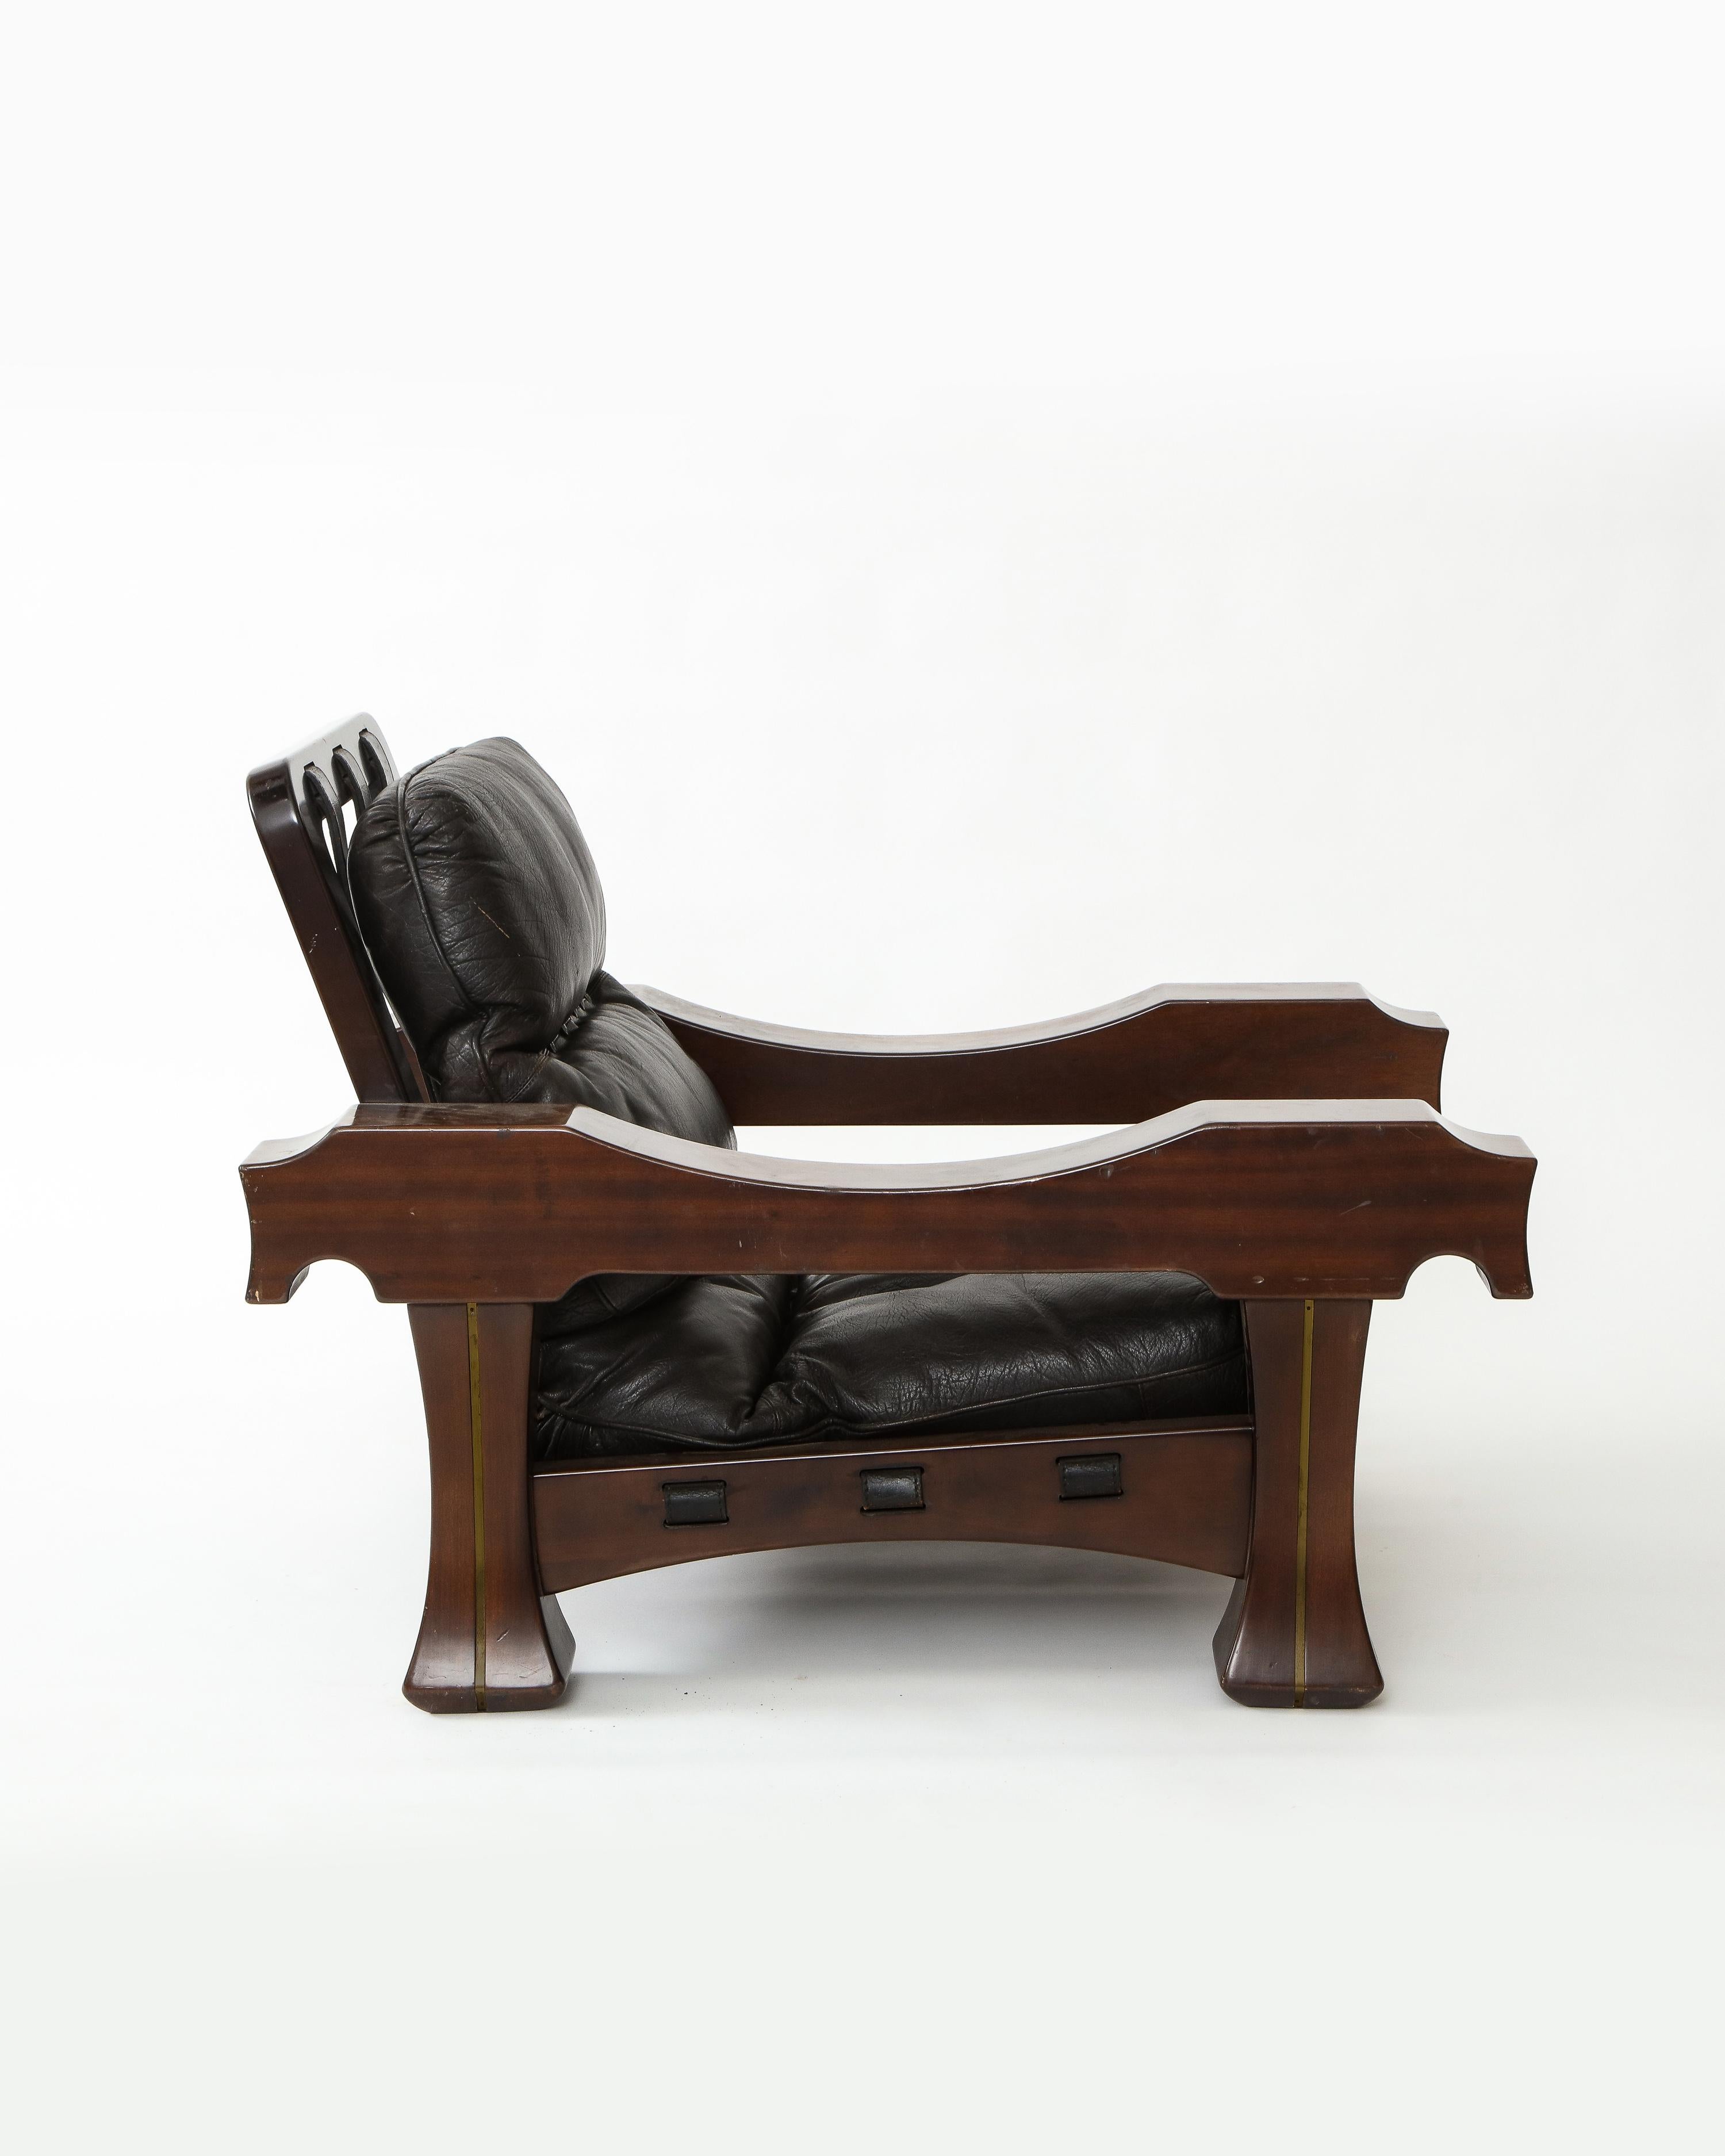 Inlay Pair of Ussaro Lounge Chairs by Luciano Frigerio in Leather, Wood and Brass